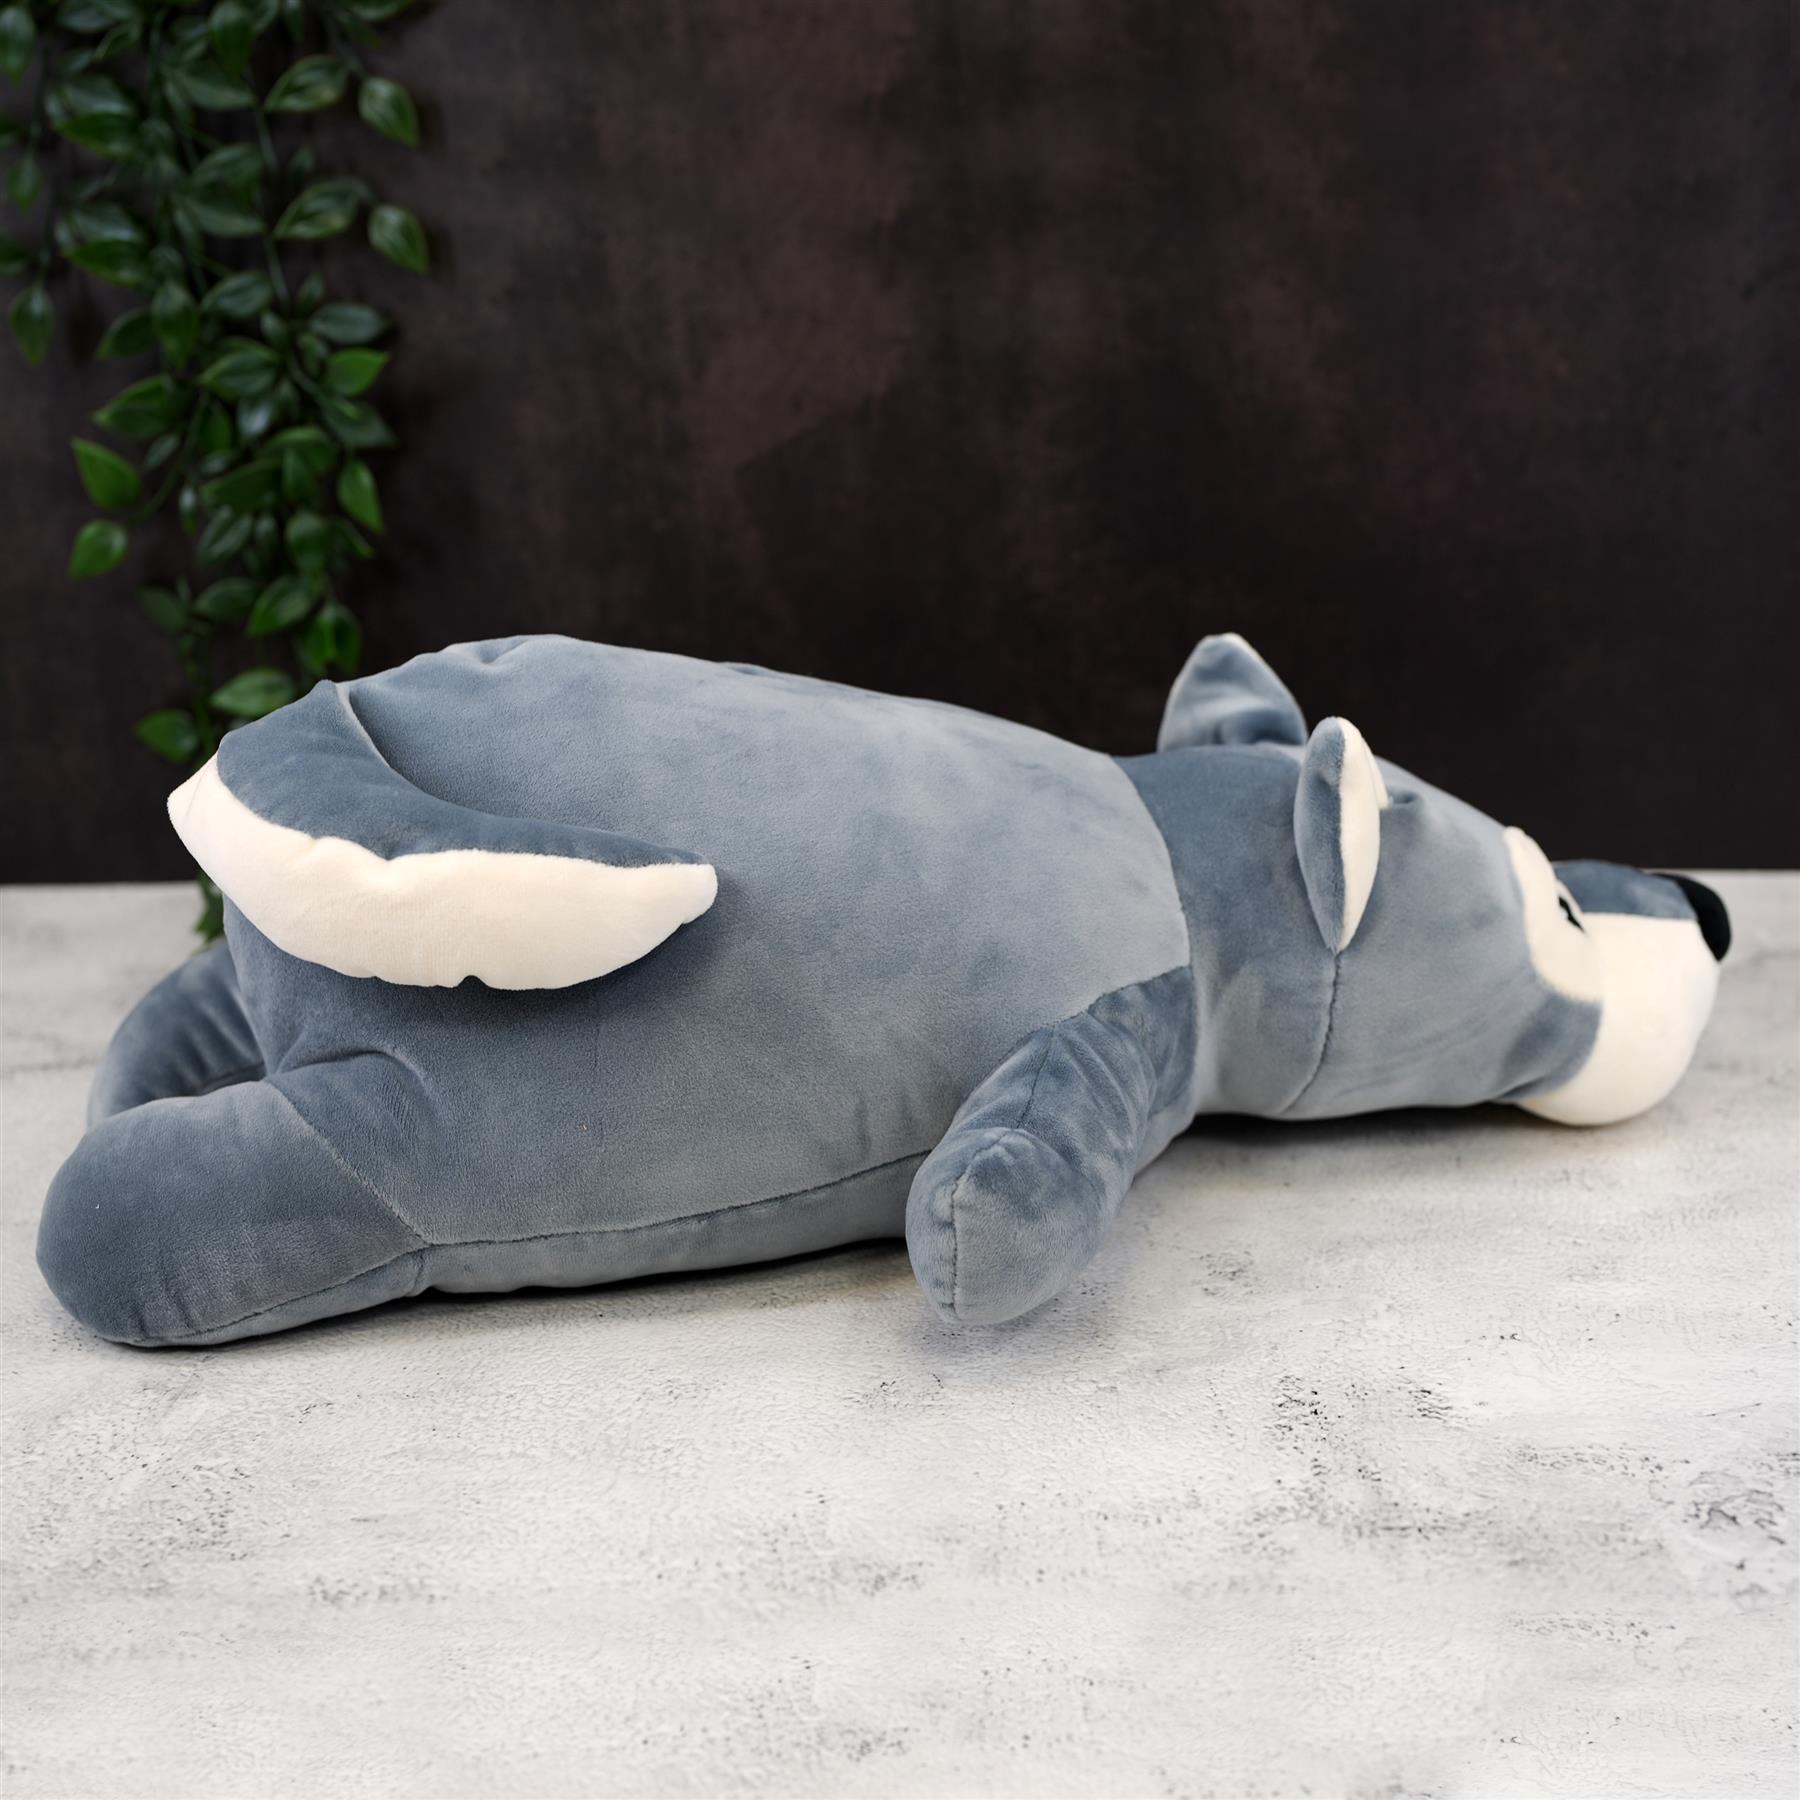 20” Super-Soft Wolf Plush Pillow Toy by The Magic Toy Shop - The Magic Toy Shop